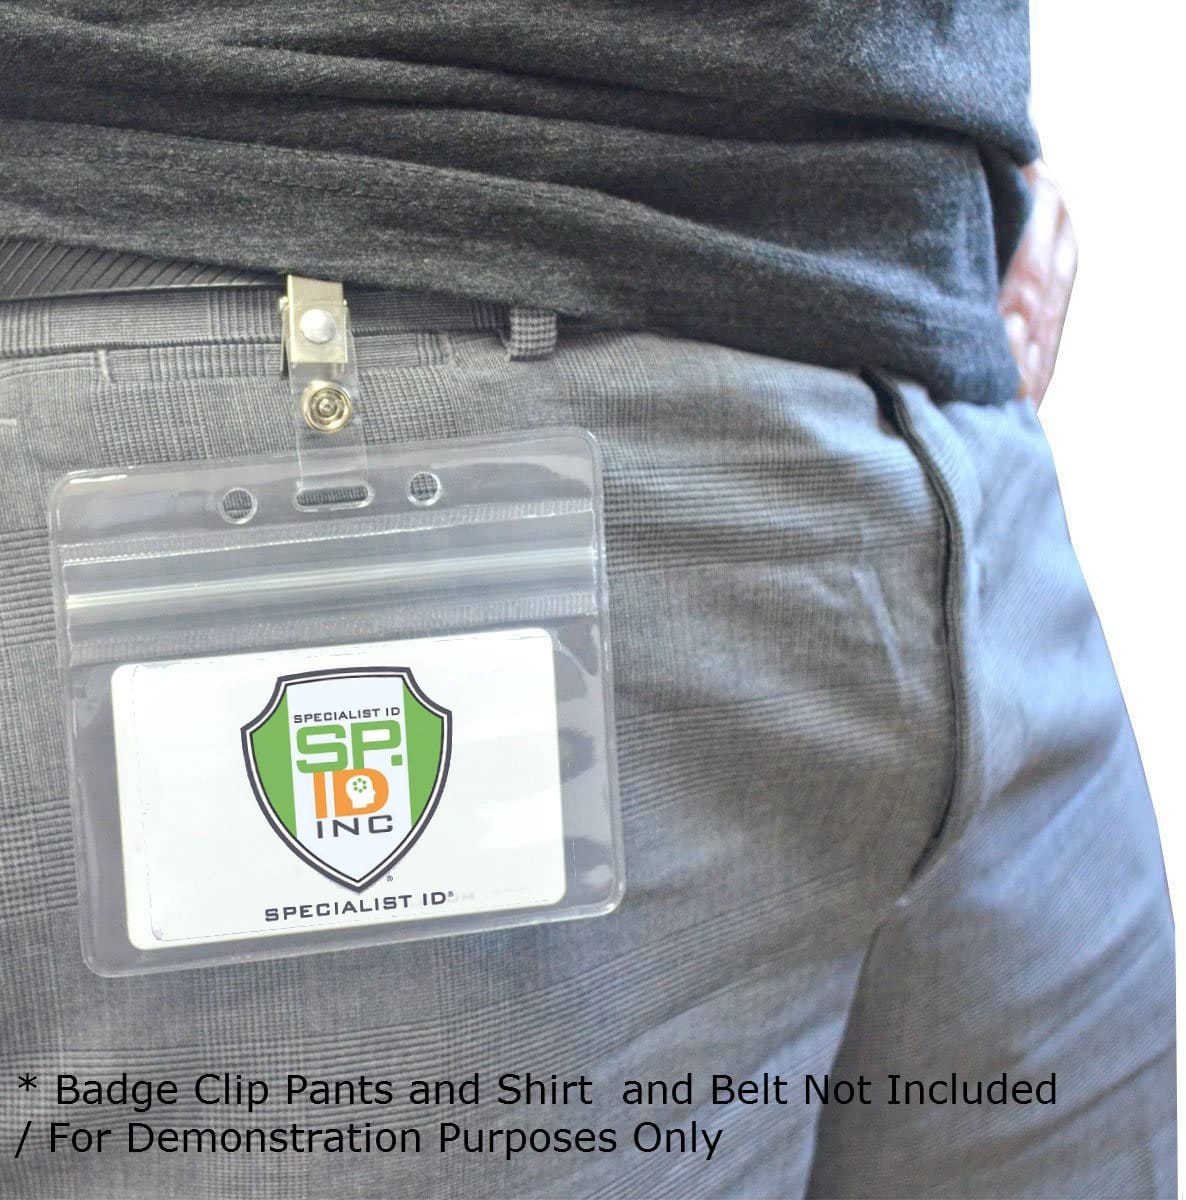 Close-up of a person wearing gray pants with a Horizontal Vinyl Badge Holder with Zipper Top (506-ZHOS-CLR) clipped to the waistband. The badge has a logo and the text "SPECIALIST ID INC." Text at the bottom clarifies that the clip, pants, and belt are not included in the sale, ensuring exceptional ID card protection.